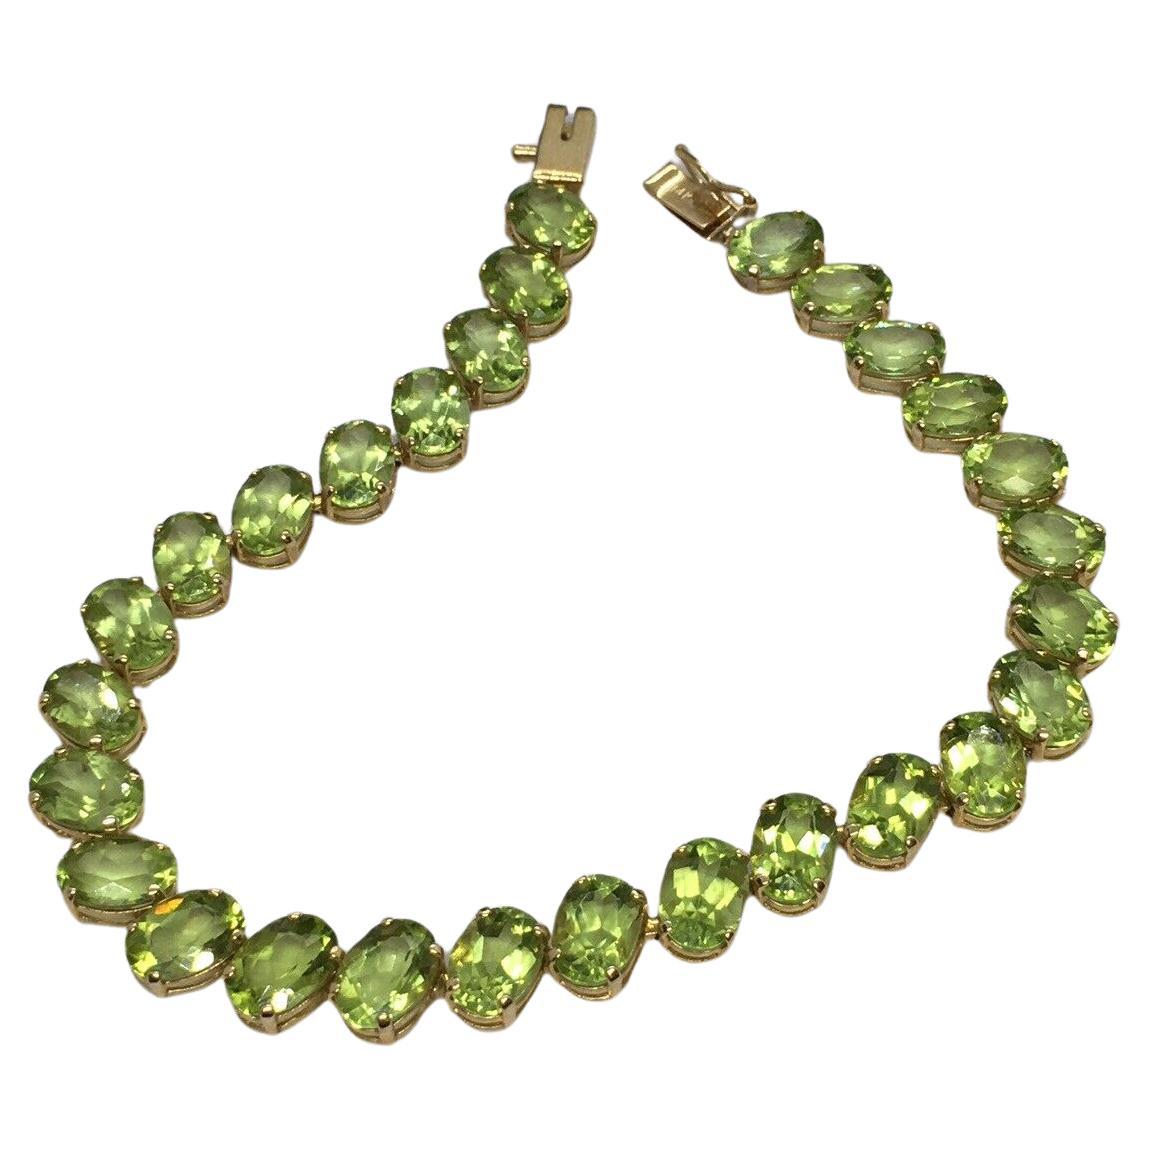 14K gold 7 mm by 5 mm 28 Oval Natural Peridot Tennis Bracelet Women 7.25 inch For Sale